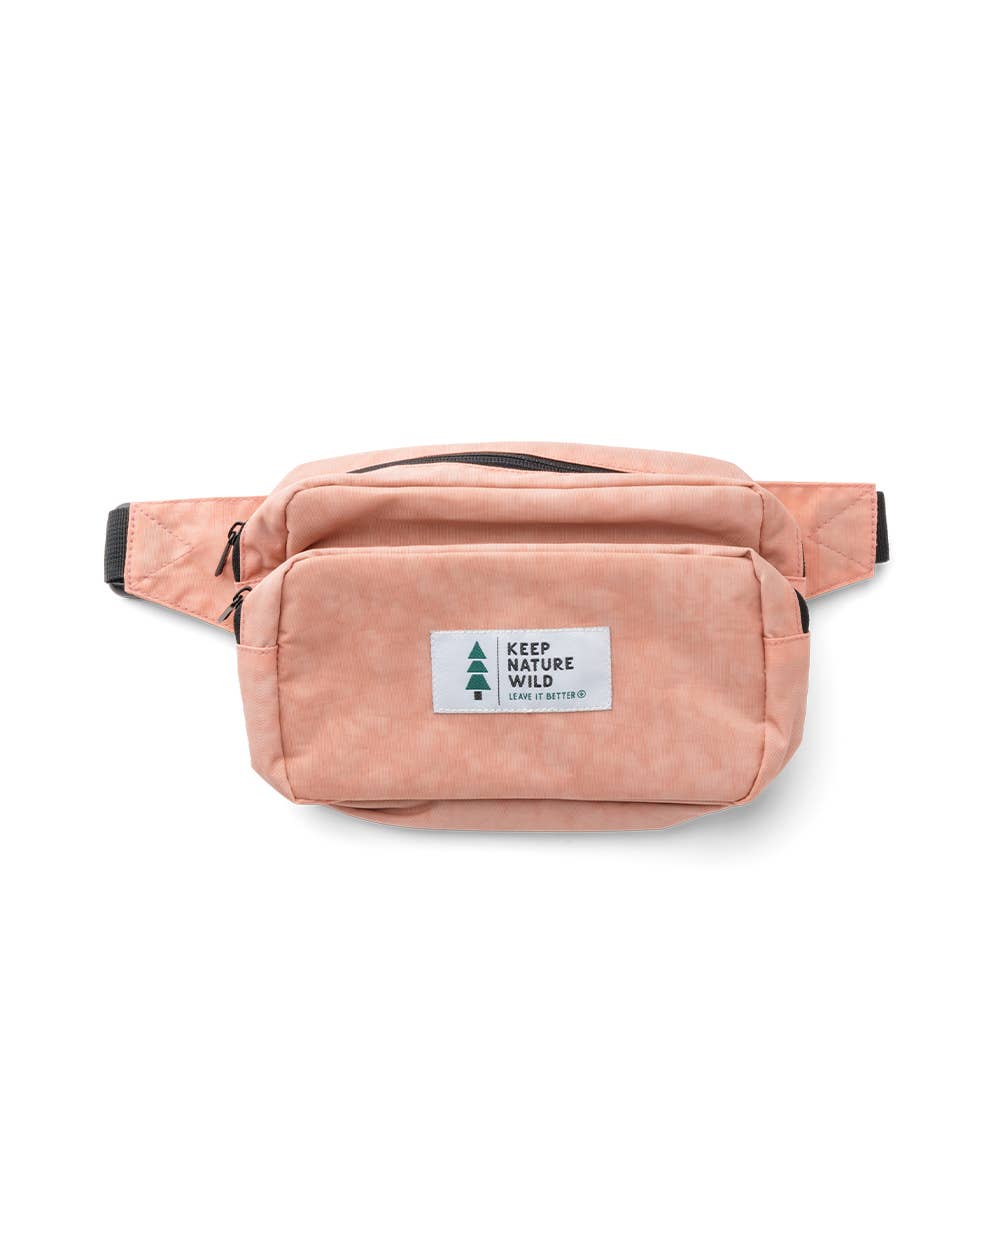 Blush Fanny Pack by Keep Nature Wild